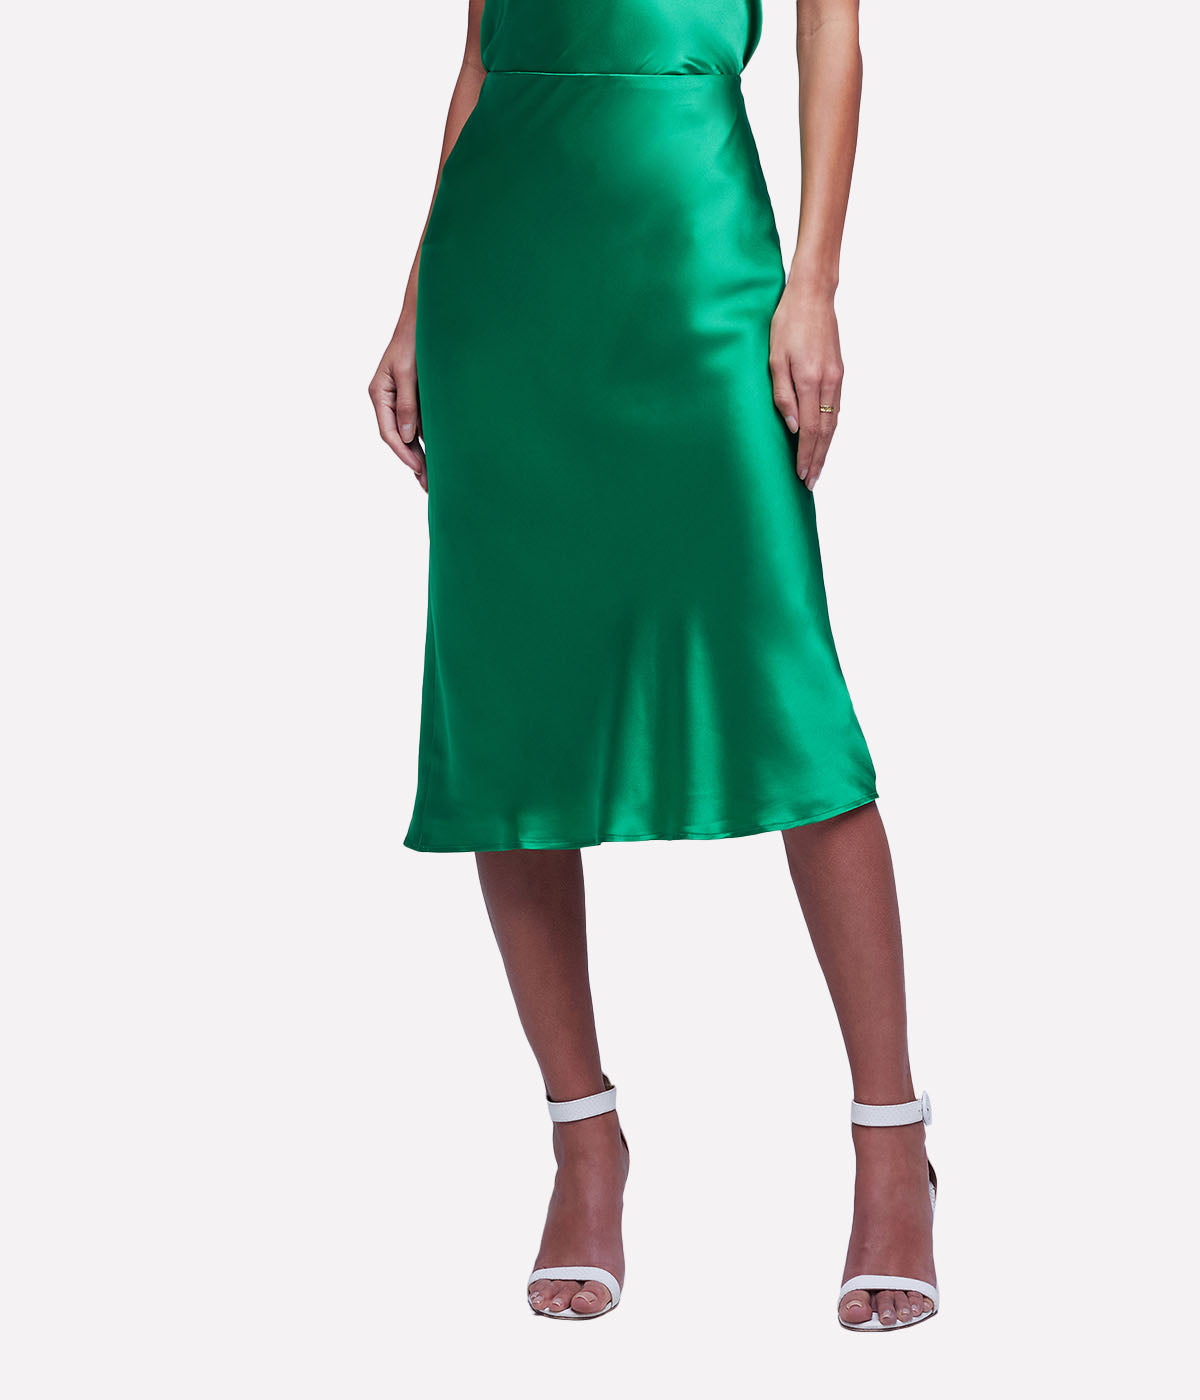 Perin Bias Mid Length Skirt in Grass & Green